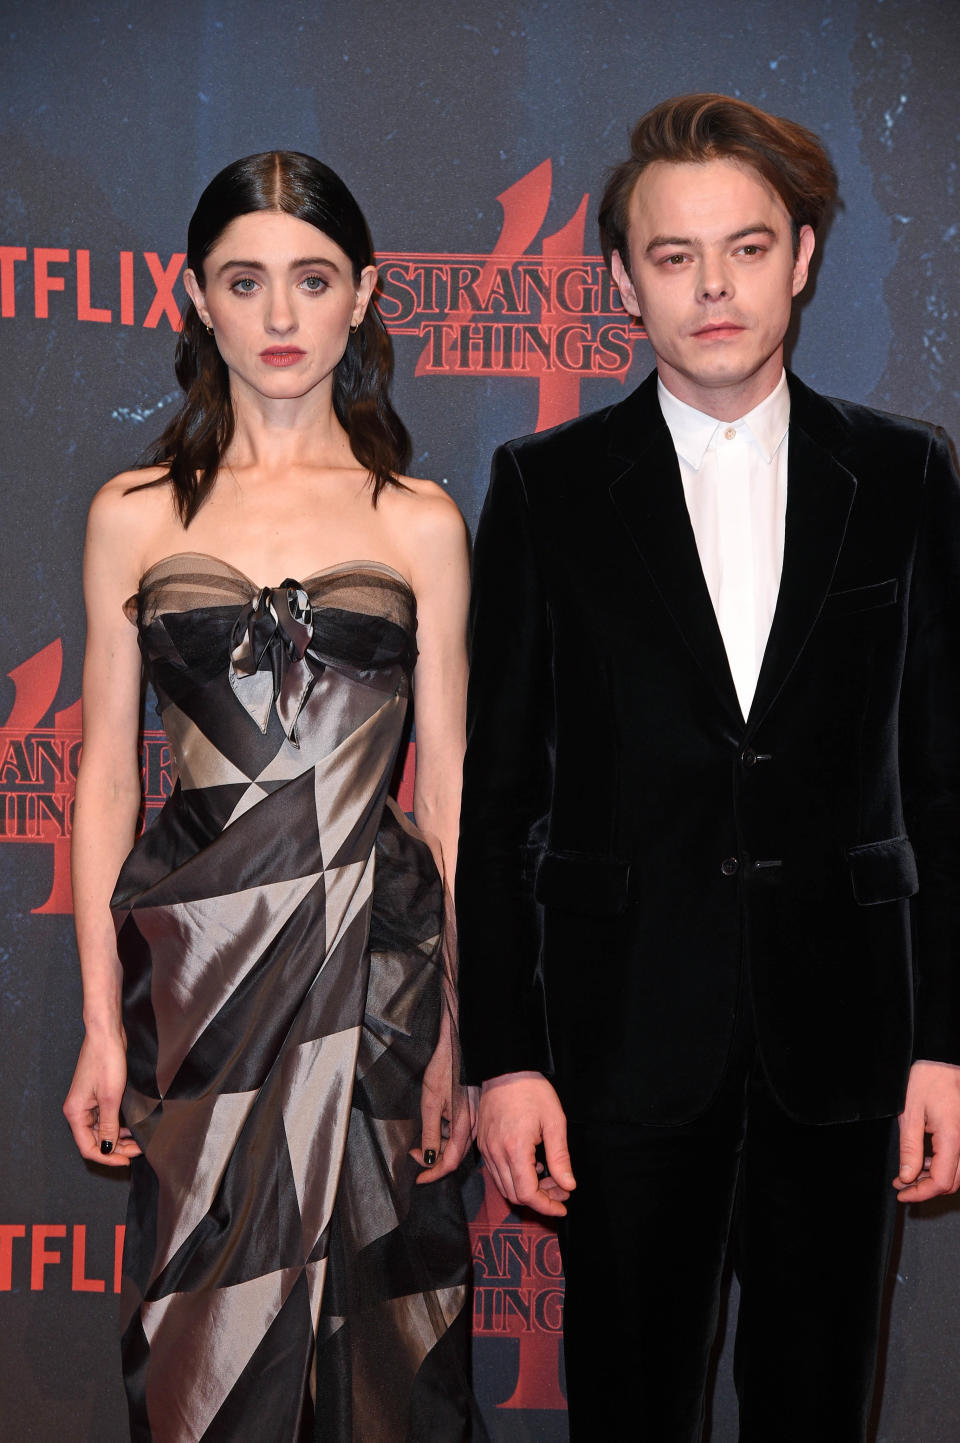 Two actors at a 'Stranger Things' event, woman in a strapless dress with bow detail, man in black velvet suit